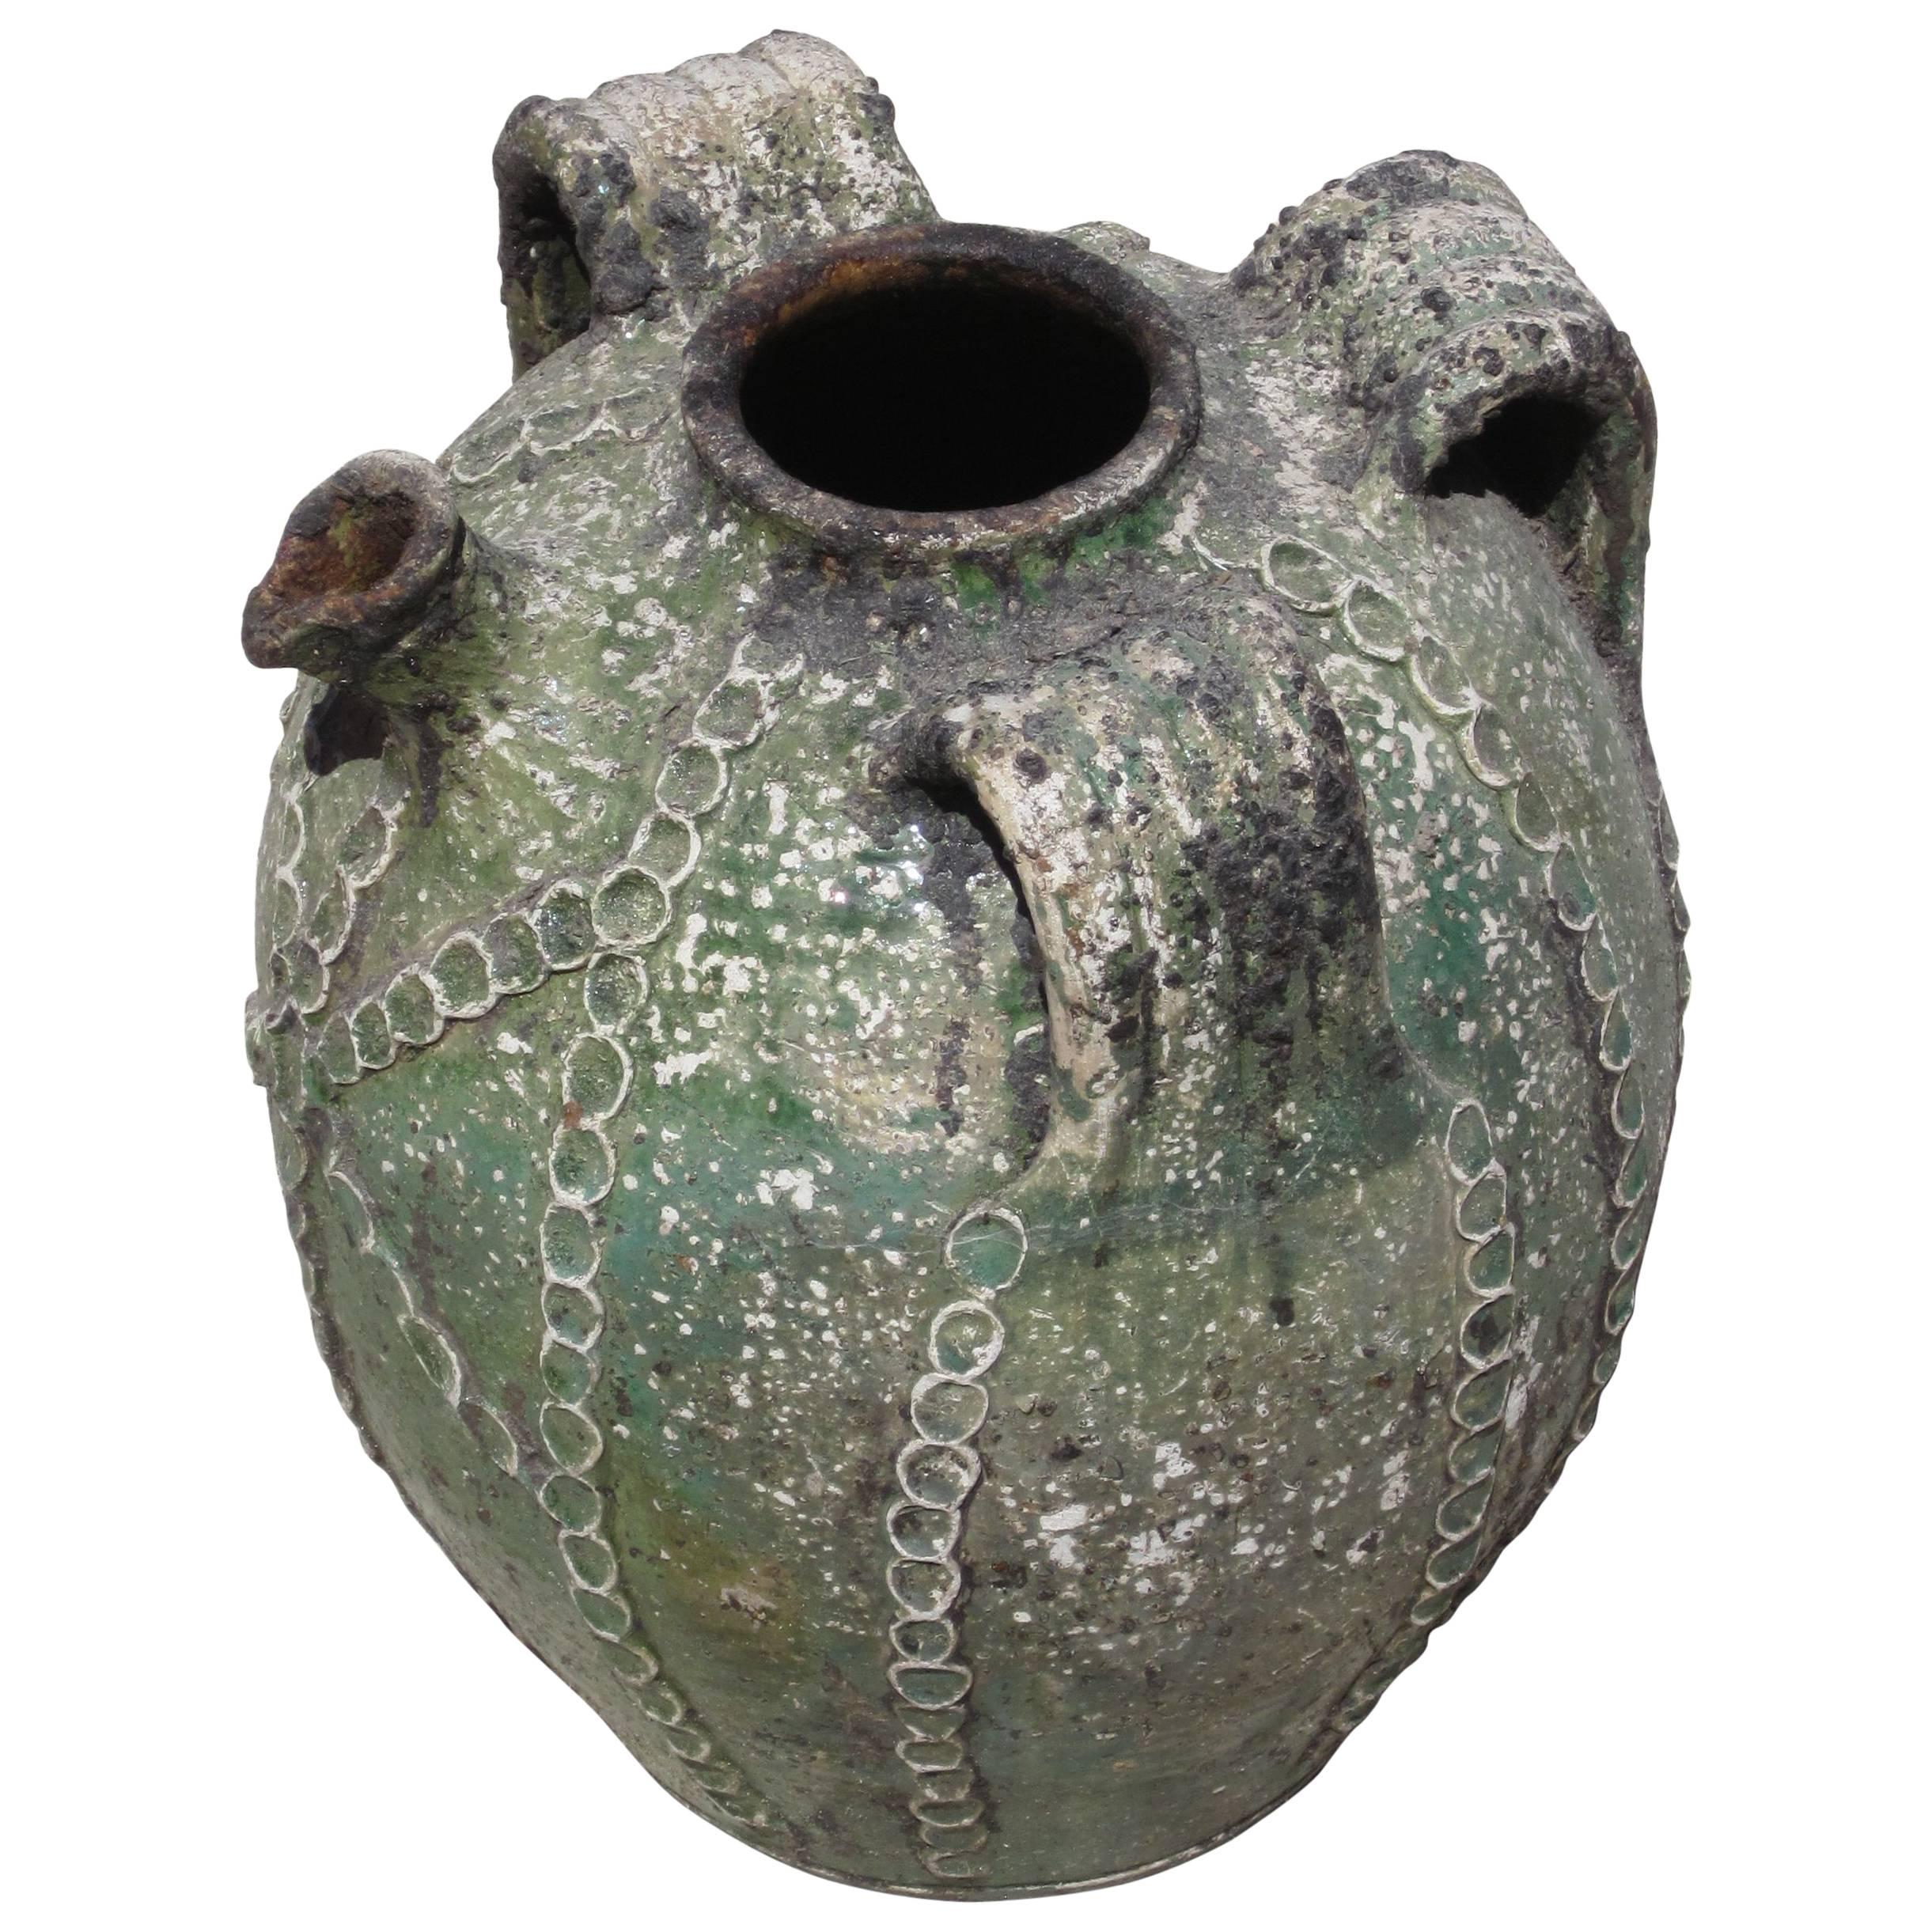 19th Century Textured Green Jug with Handles and Spout, France